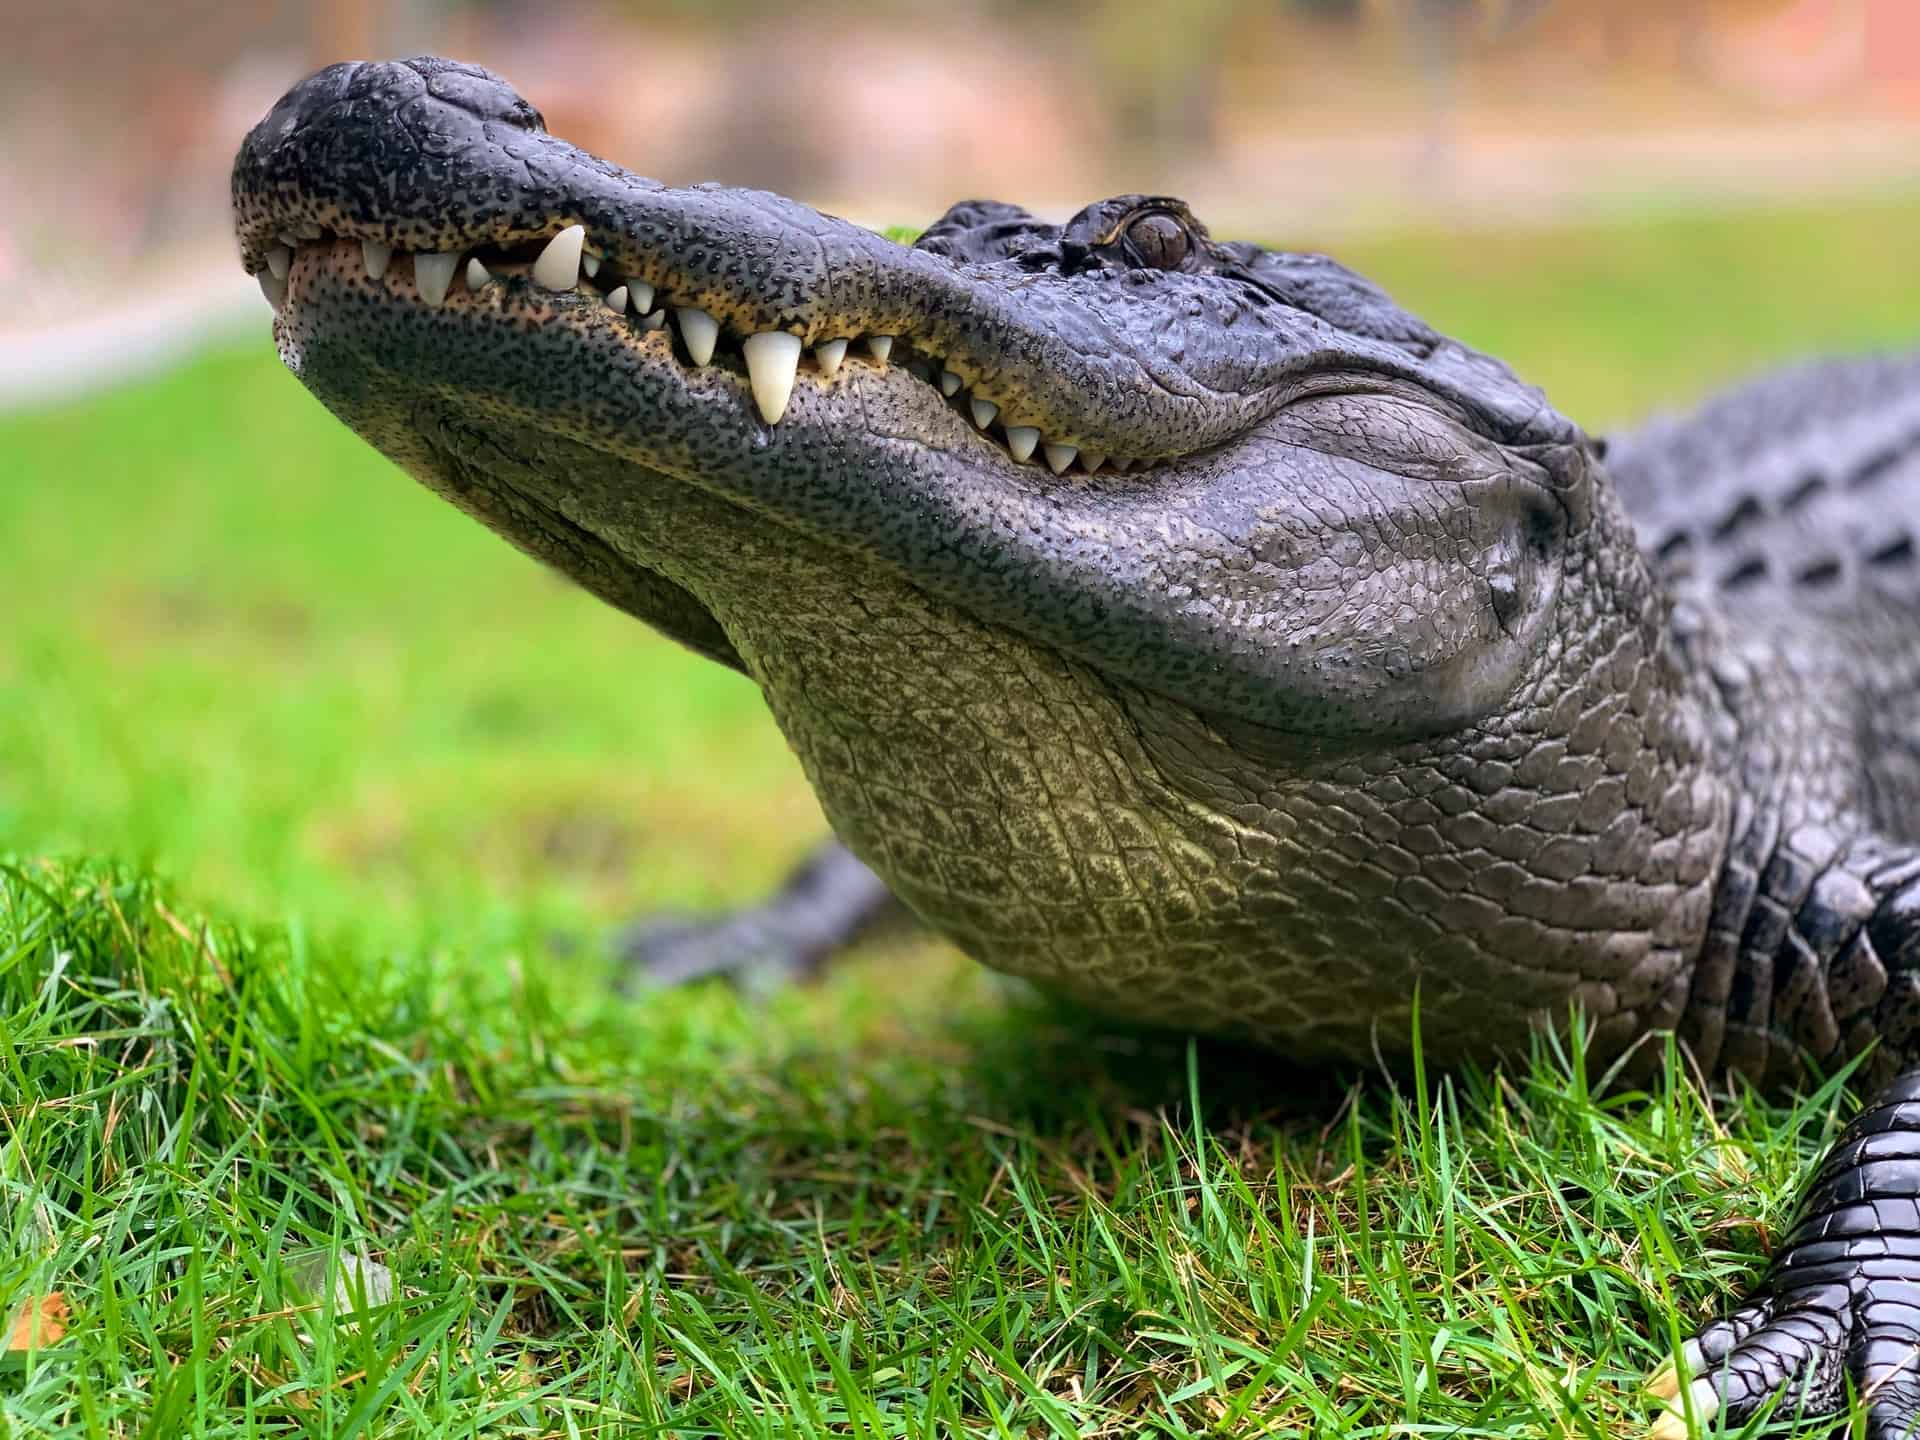 Animal Trainer Attacked by Alligator While Performing at a Birthday Party